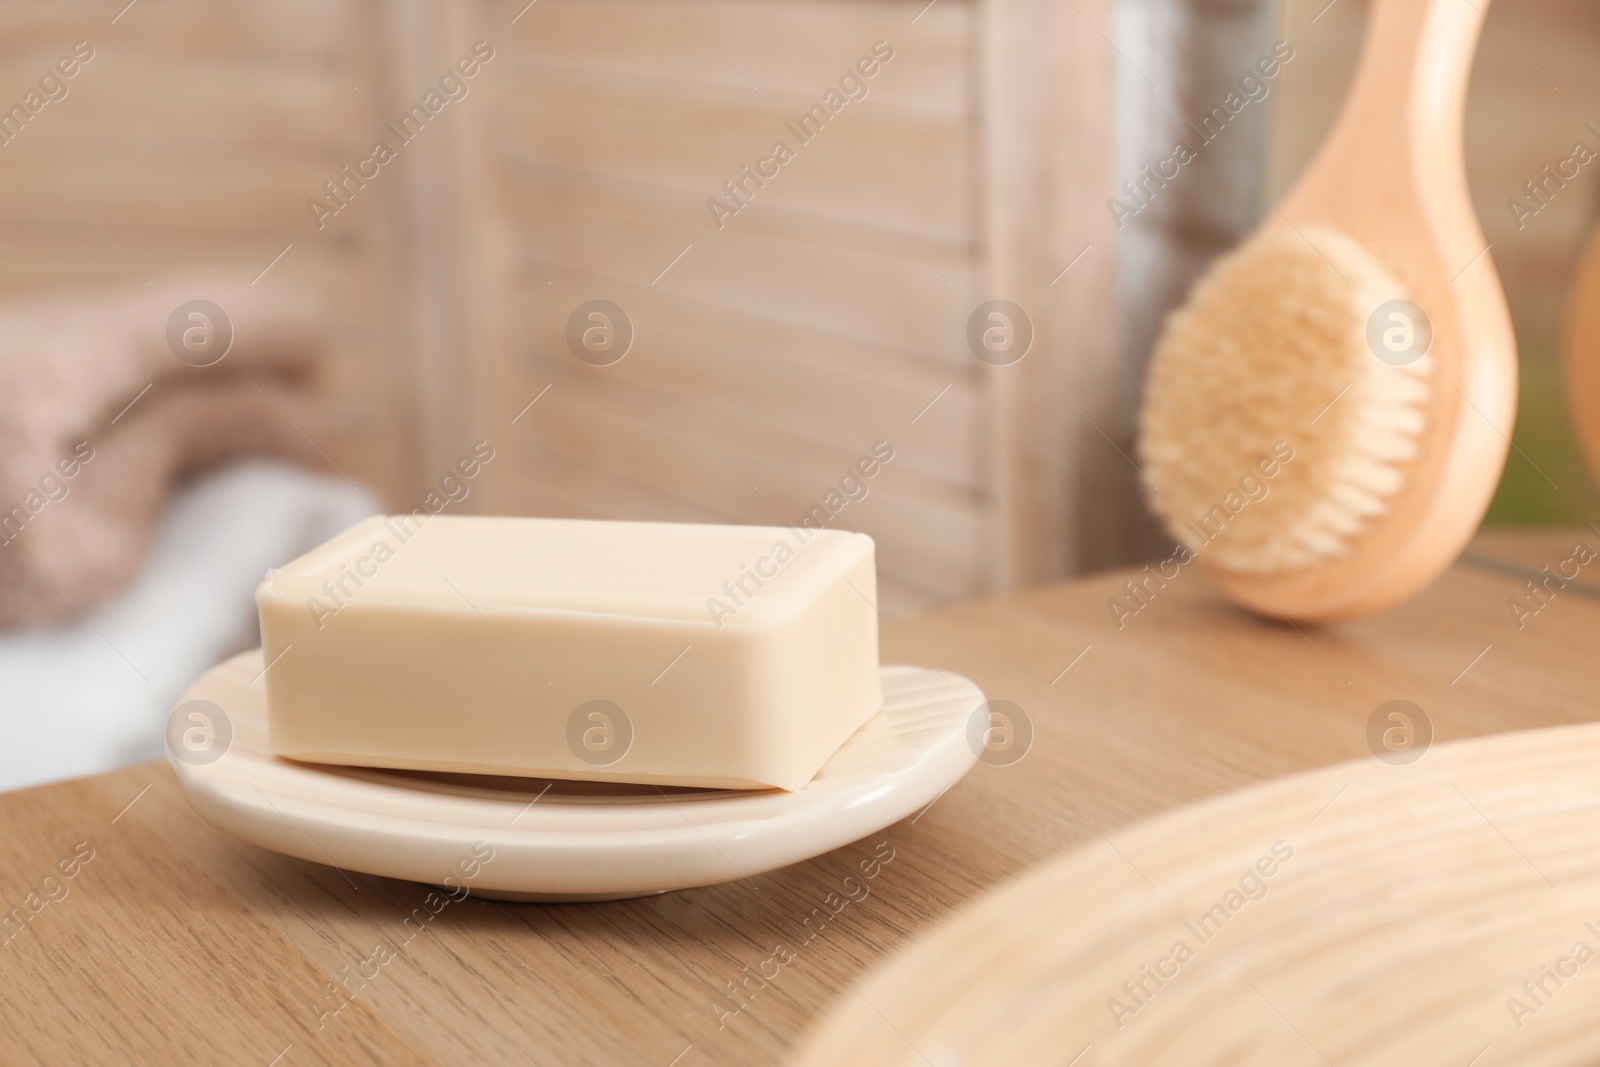 Photo of Dish with soap bar on wooden table. Space for text